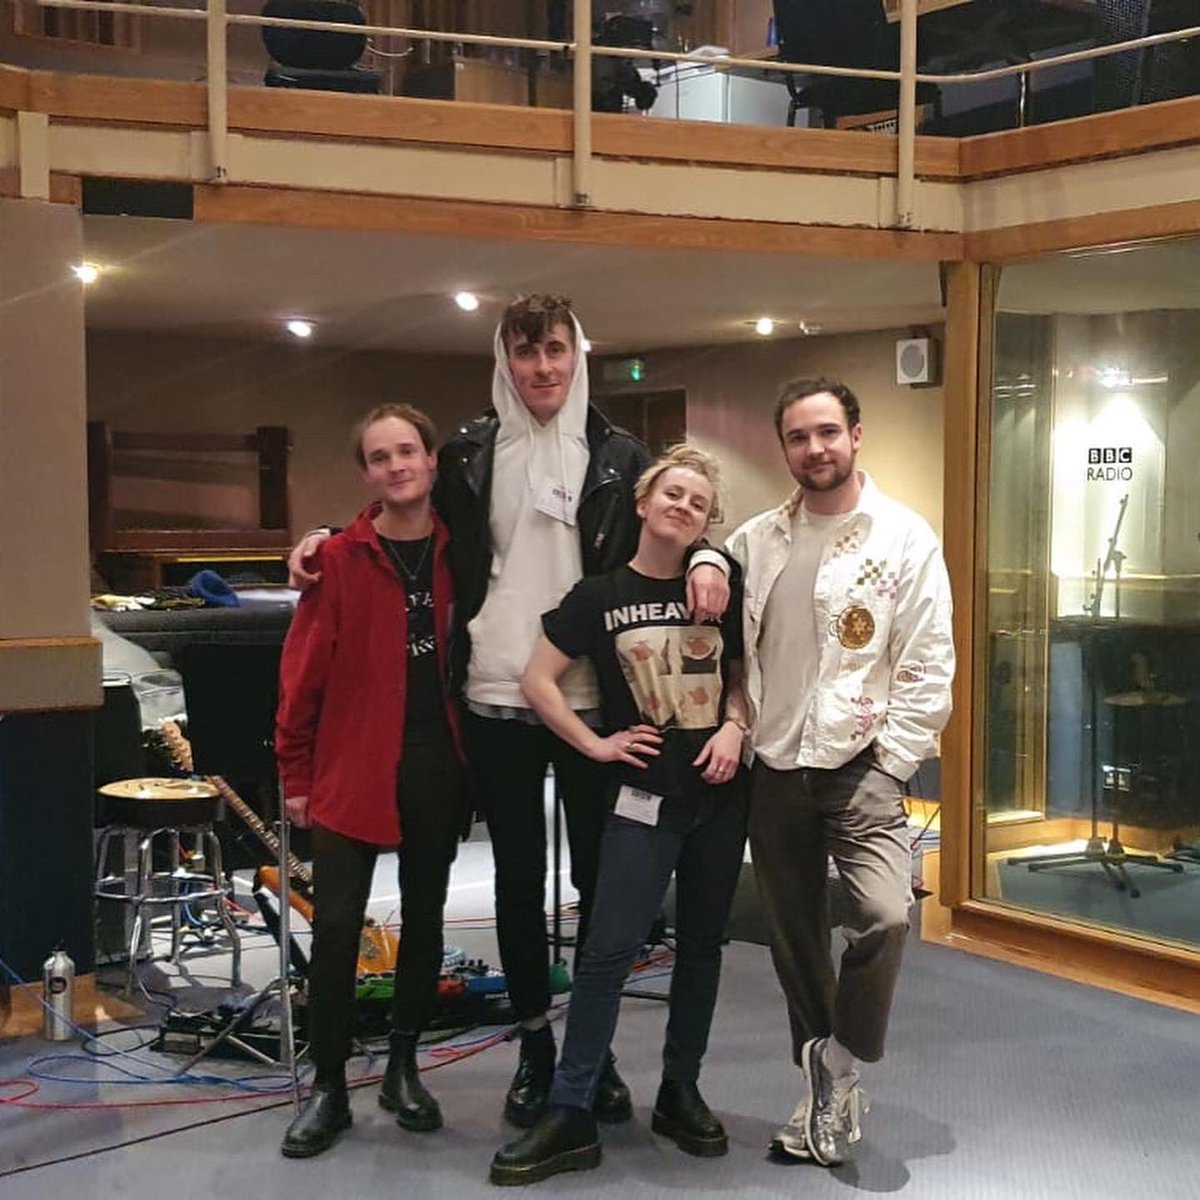 Our Maida Vale session for @BBCR1 aired last night on the one and only @jackxsaunders’ ‘Future Artists’ show! You can listen back here (1hr 9mins): linktr.ee/thylamusic We played two songs from our debut album; ‘Gum’ and ‘Rabbit Hole’, plus an exclusive Maida Vale Mashup!